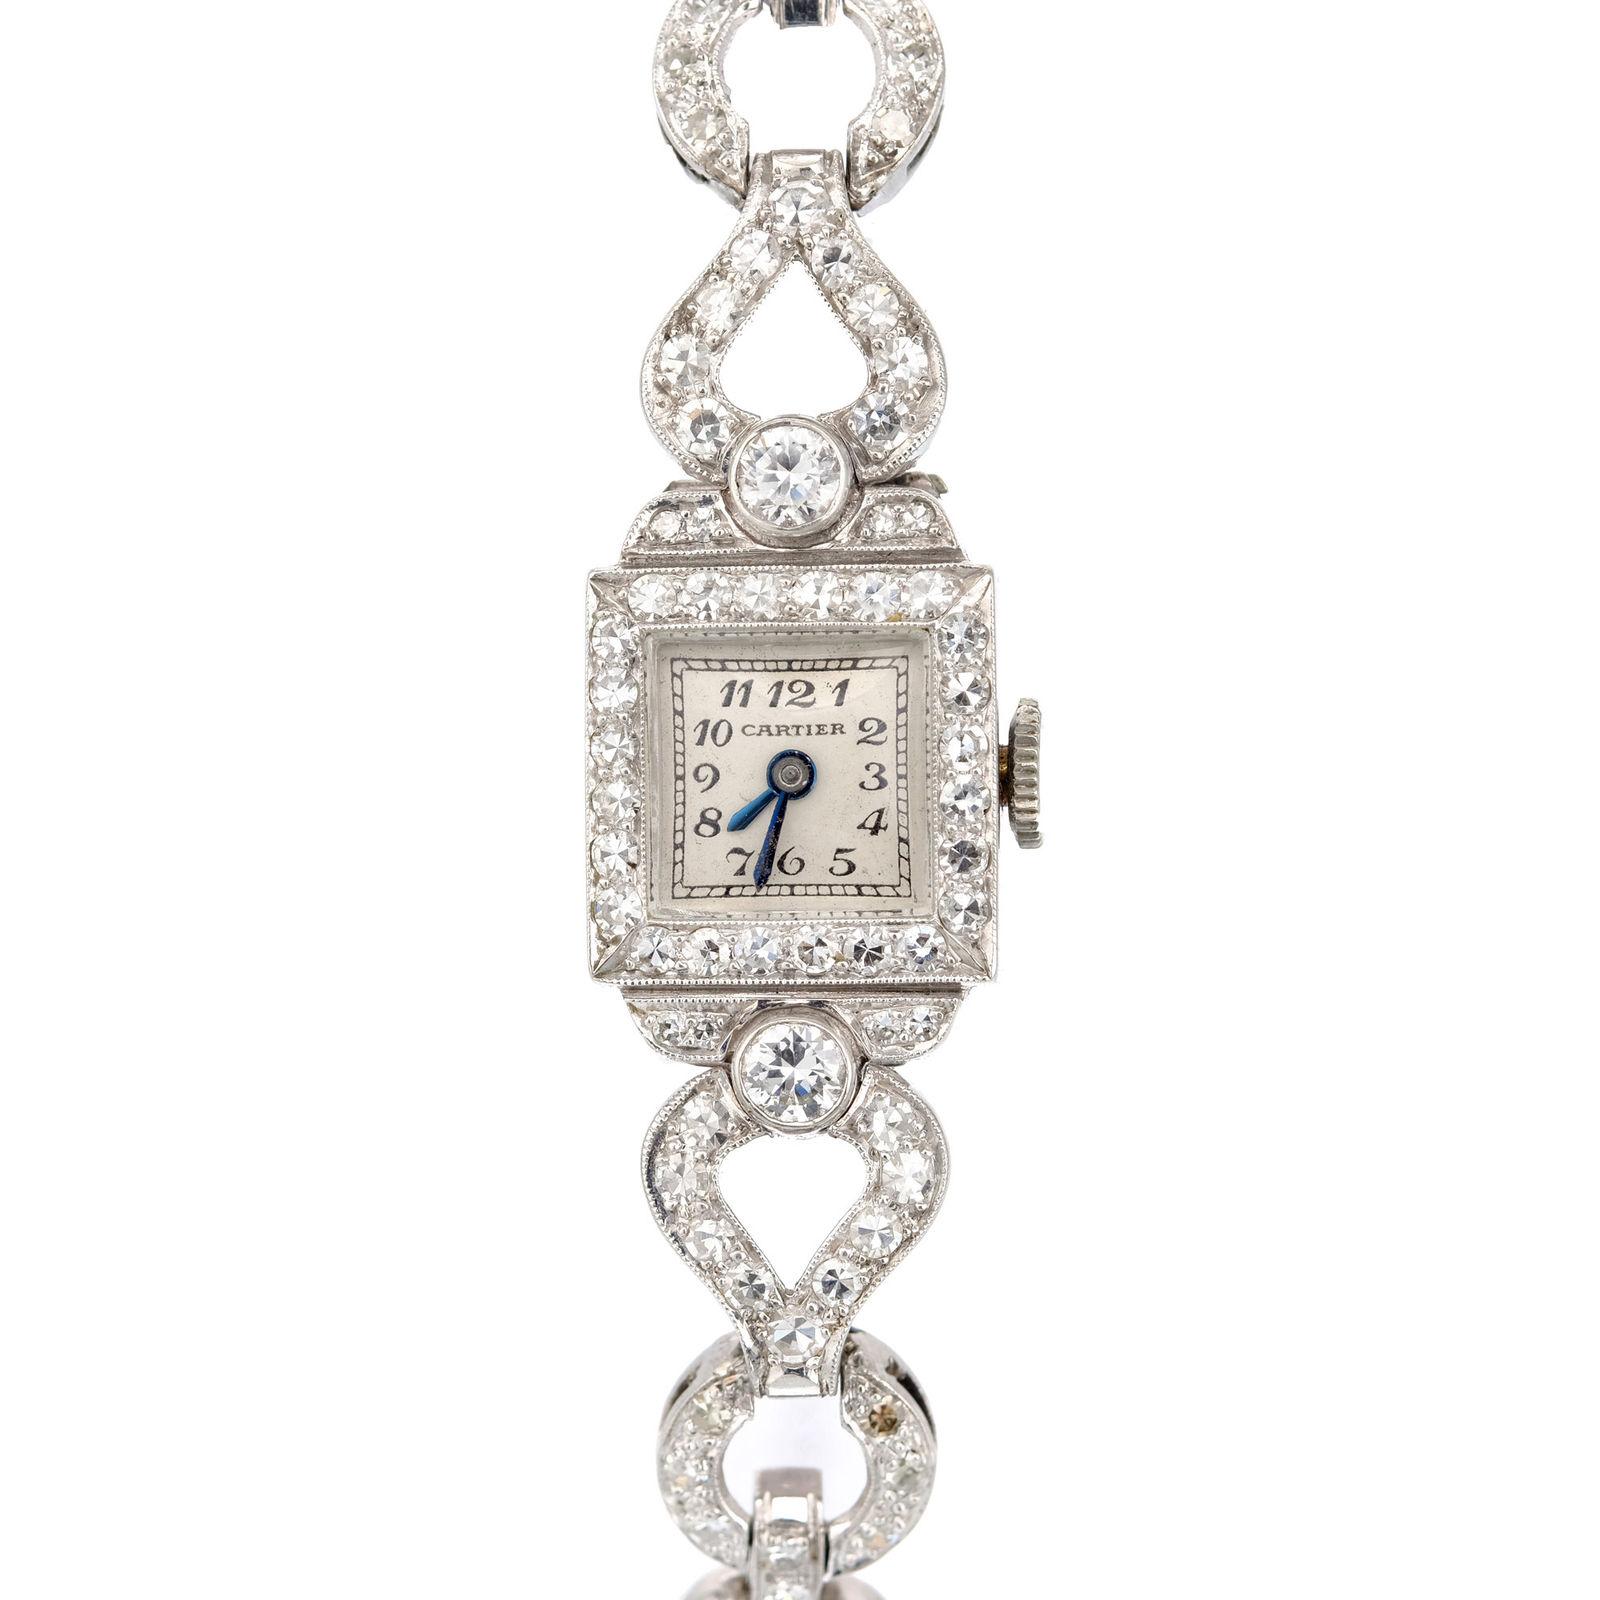 Vintage Cartier Diamond Watch - 4 For 